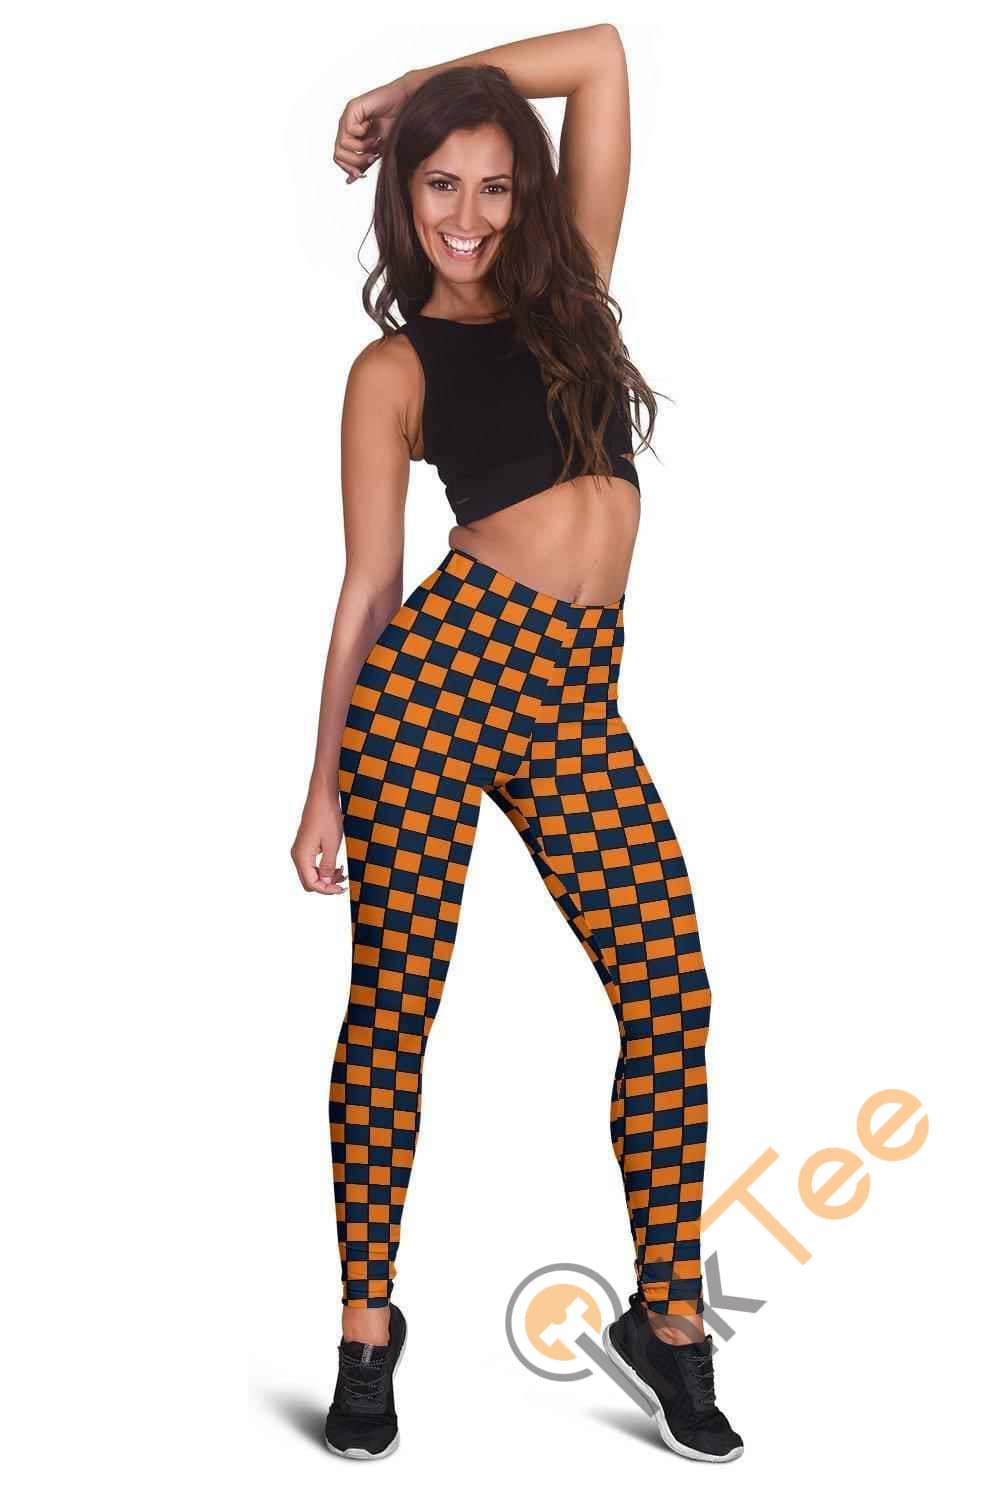 Inktee Store - Auburn Tigers Fan Inspired 3D All Over Print For Yoga Fitness Checkers Women'S Leggings Image